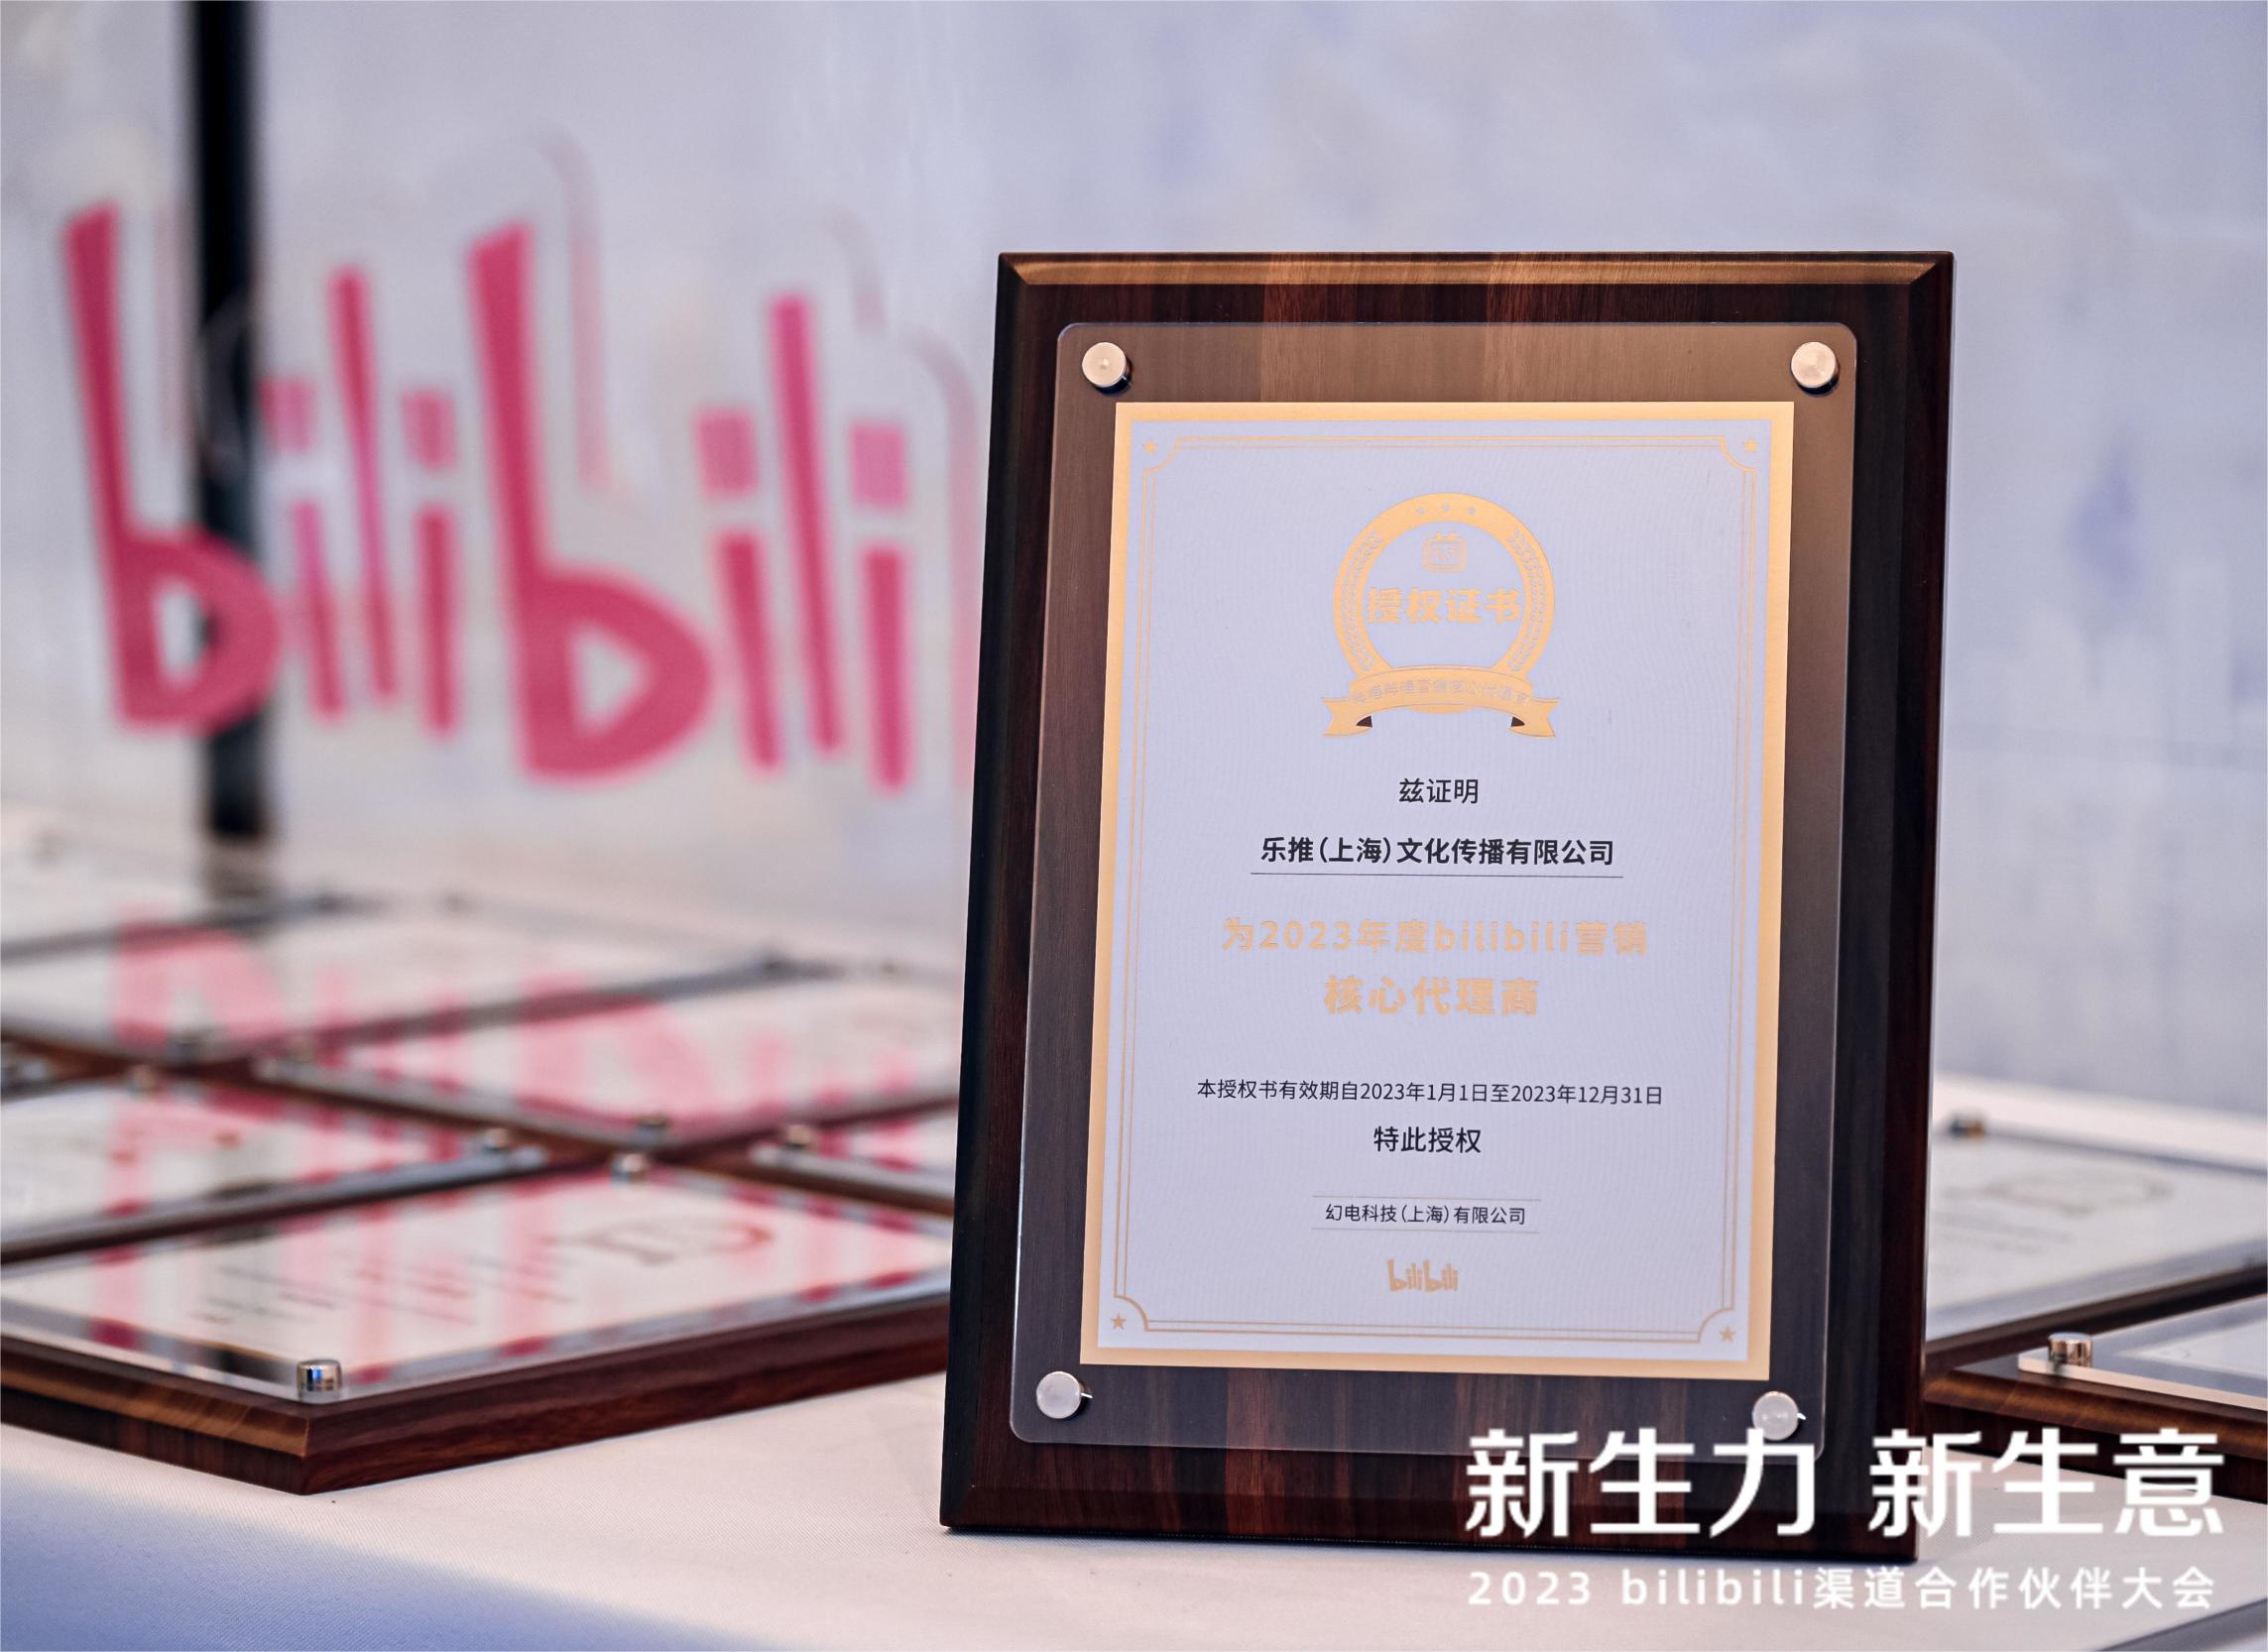 Netjoy became animportant partner of Bilibili and won two annual awards